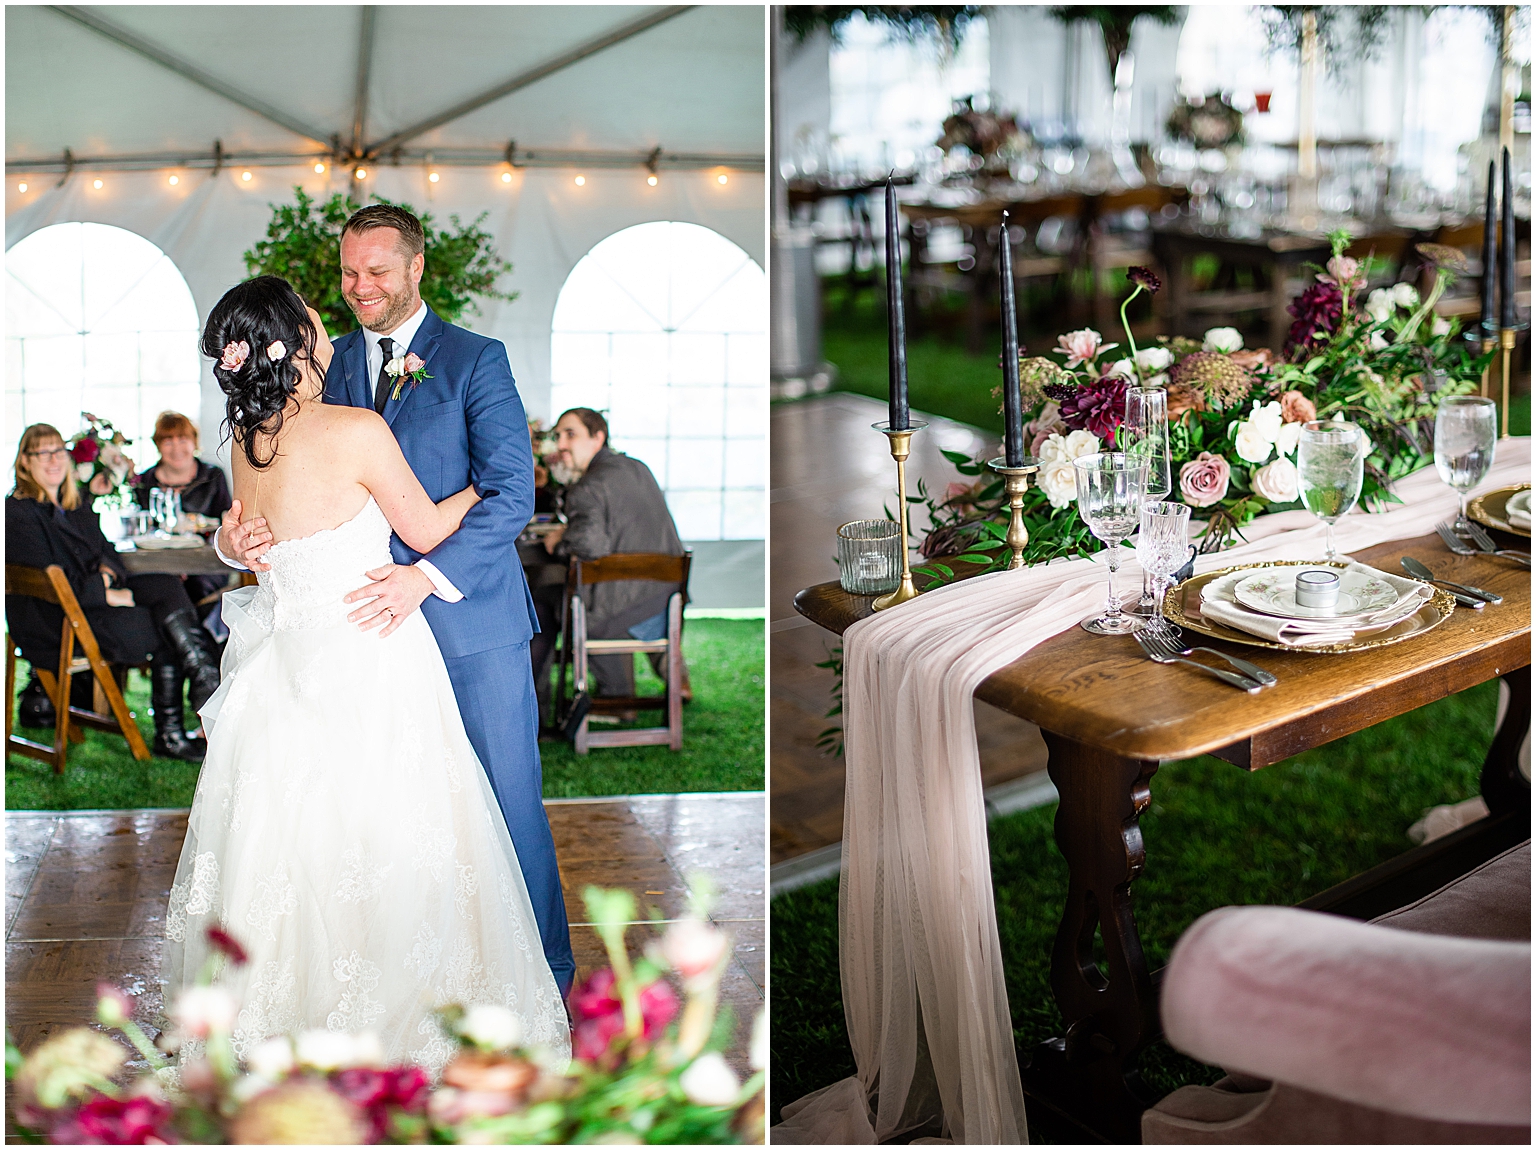 Bride and Groom's first dance as a married couple, and their romantically draped sweetheart table